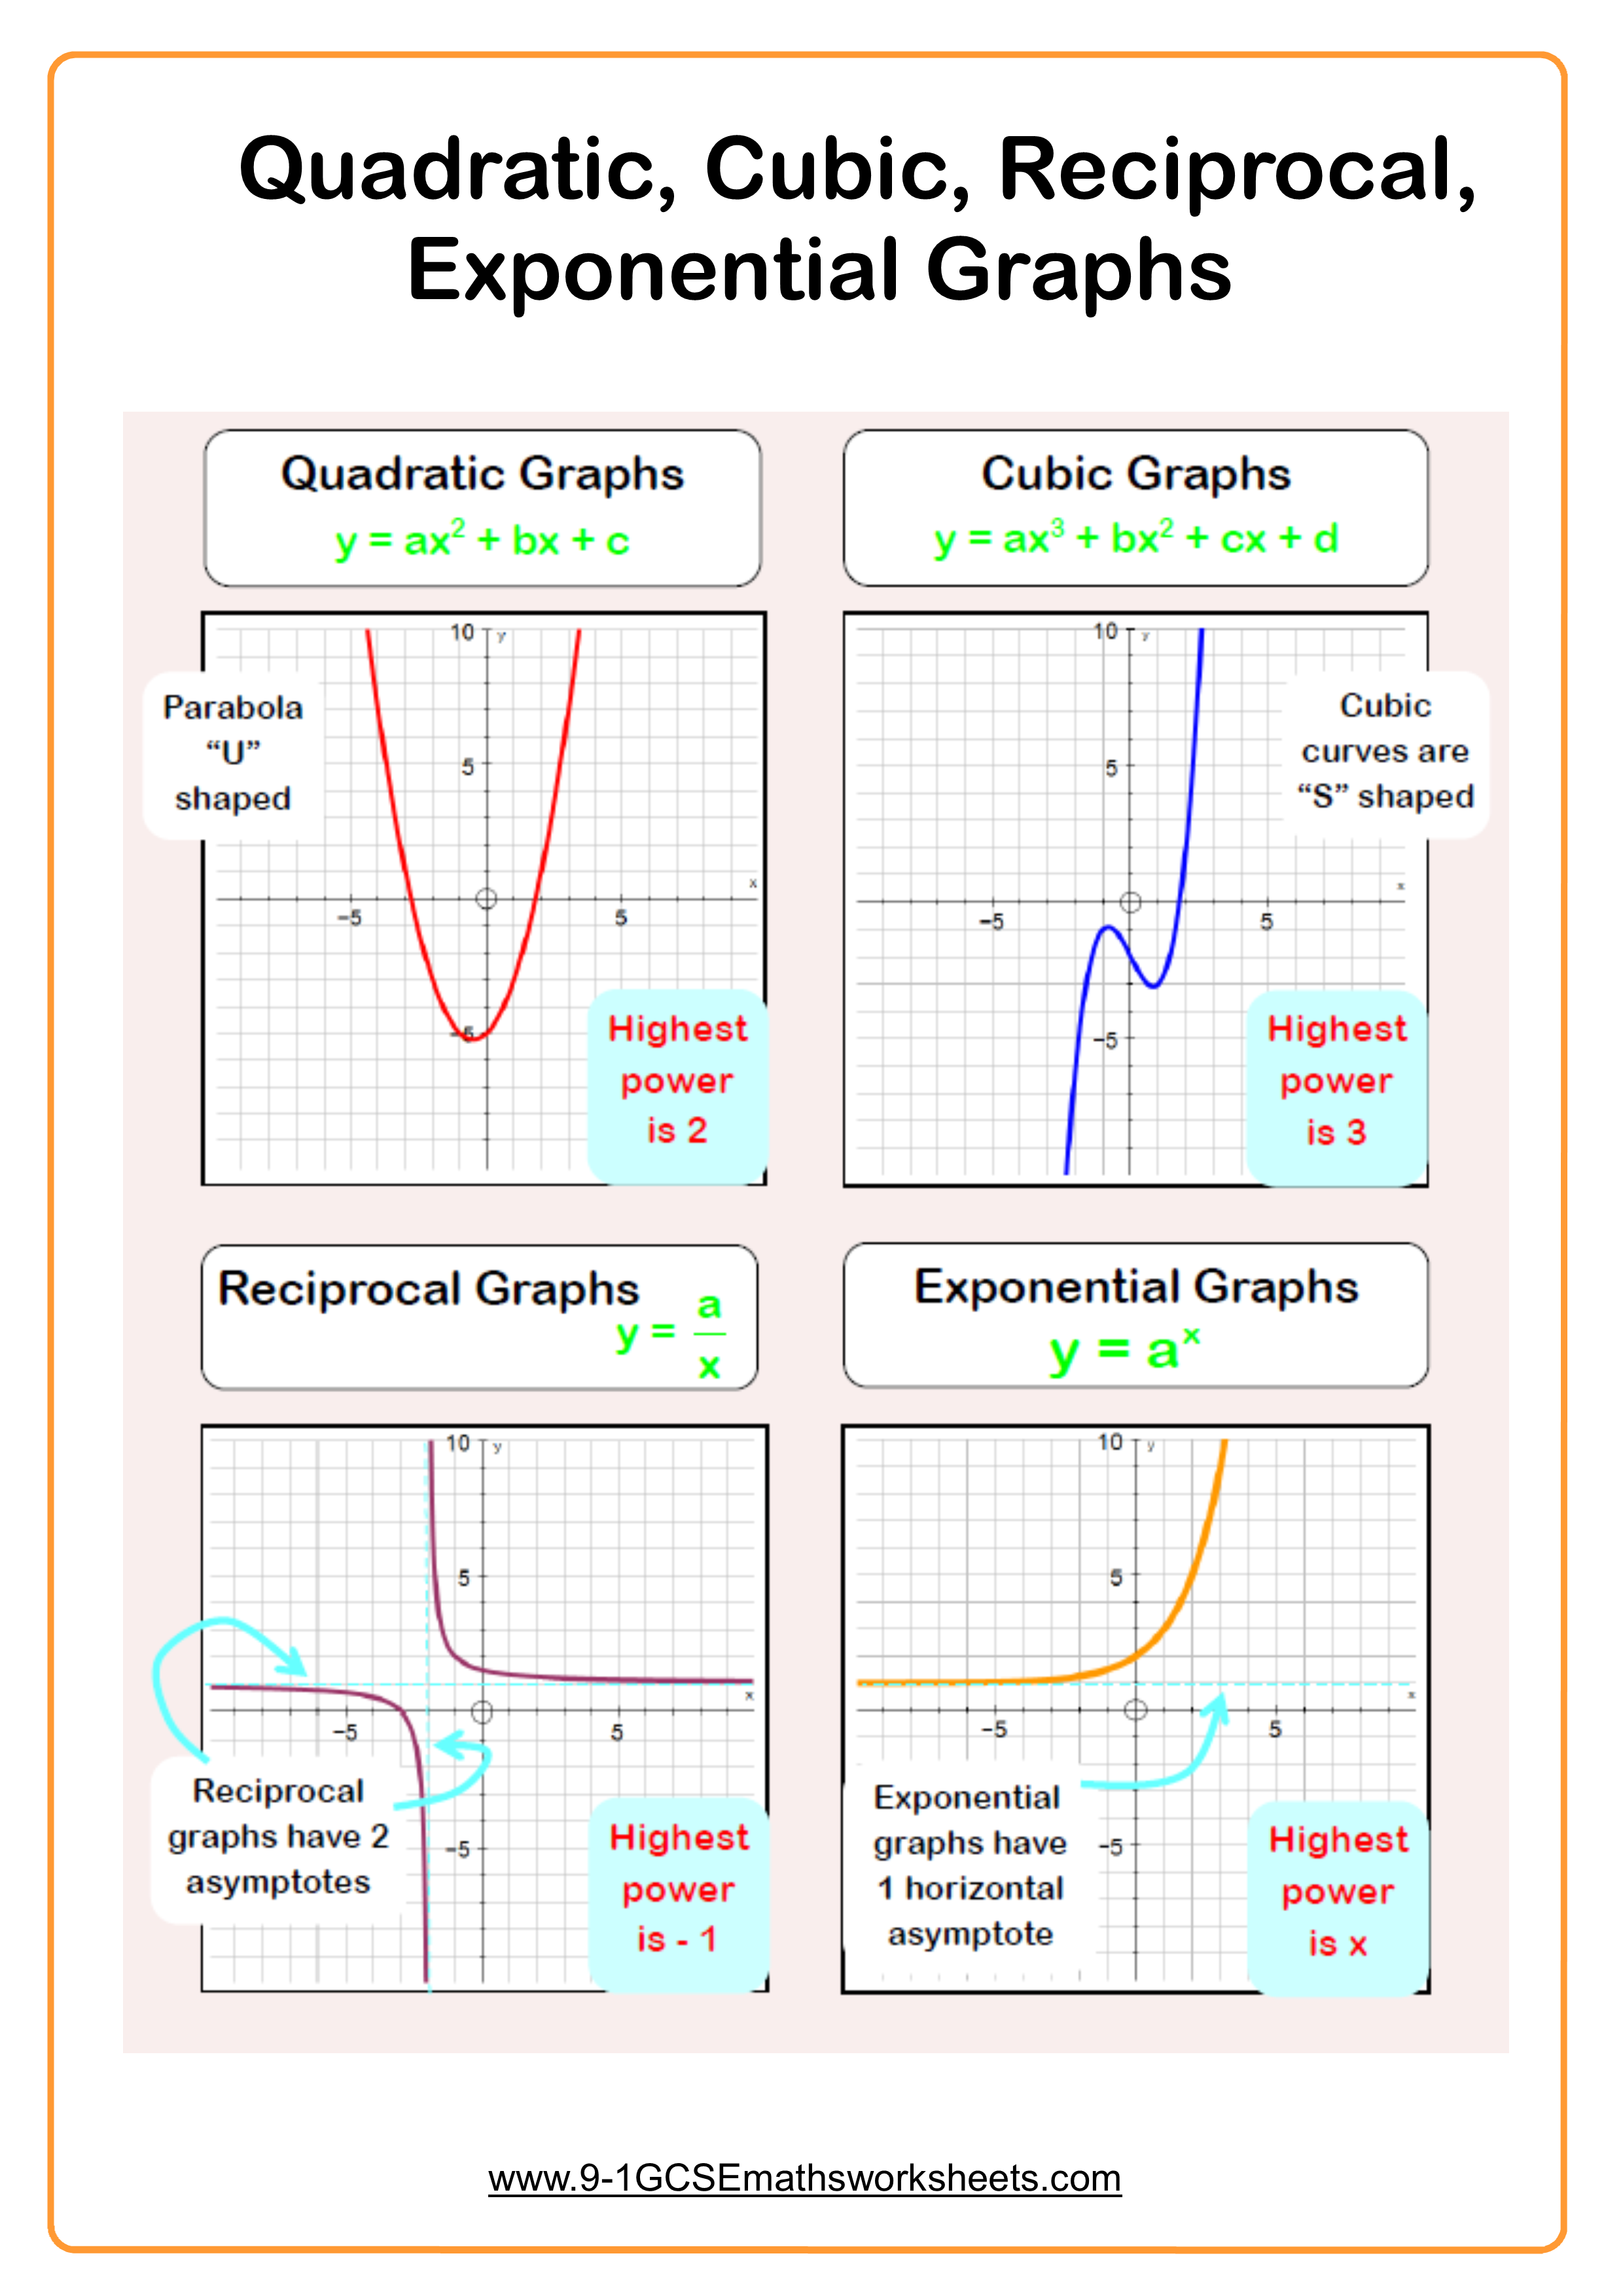 Graphing Reciprocal Functions Worksheet Free Download Goodimg co